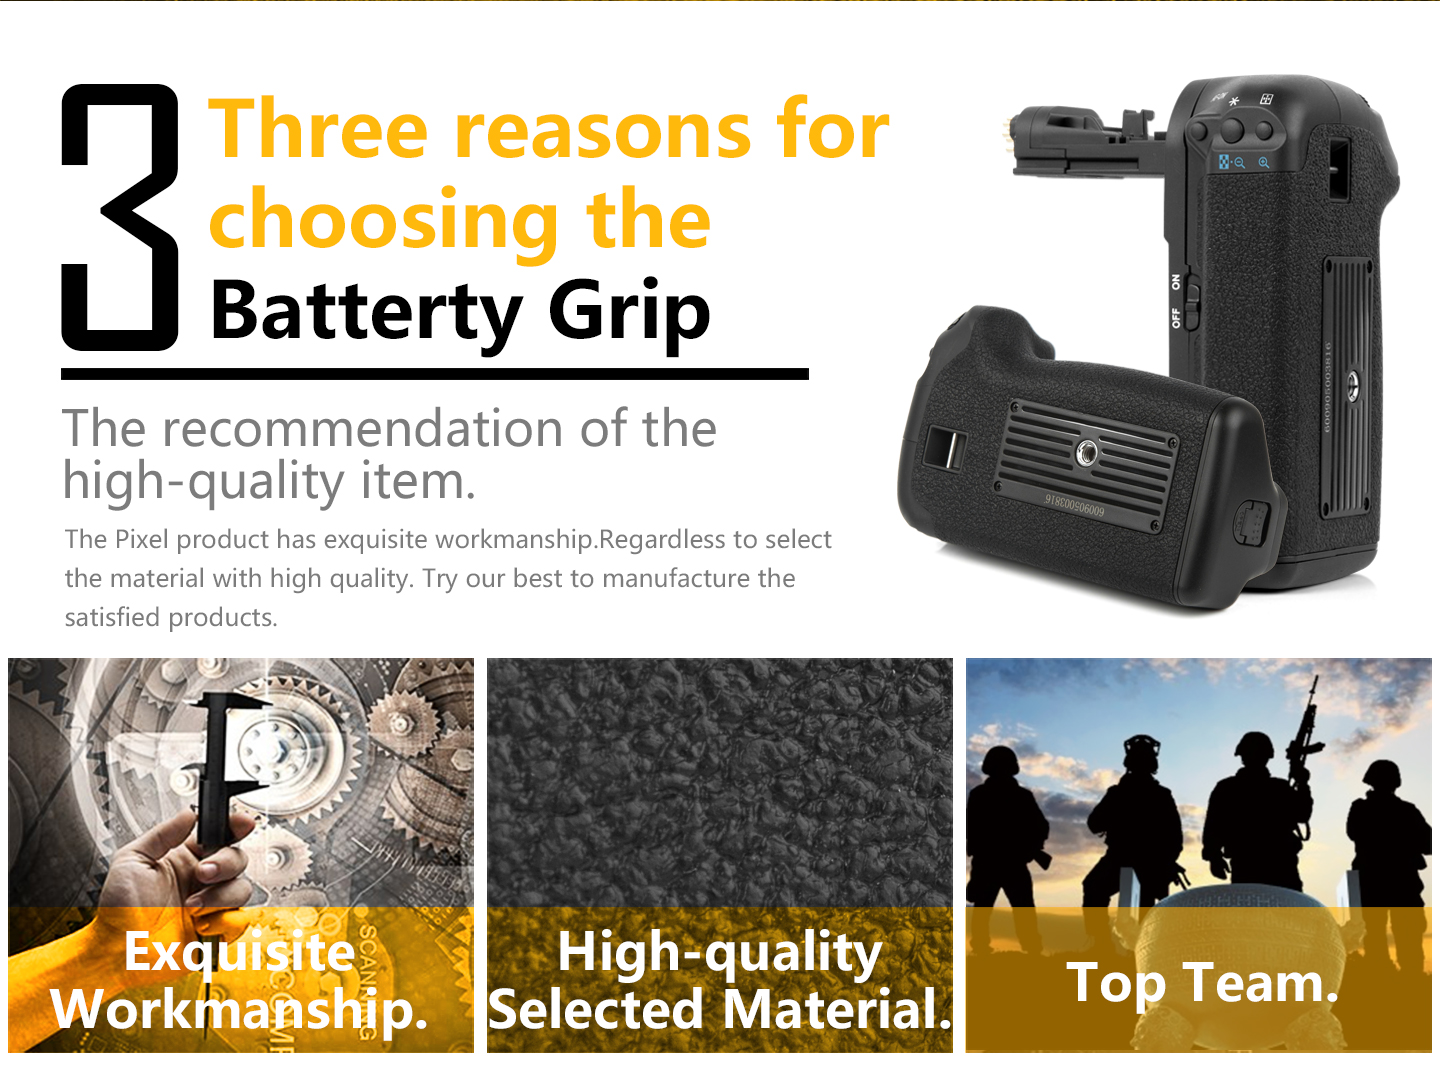 Three reasons for choosing the Batterty Grip